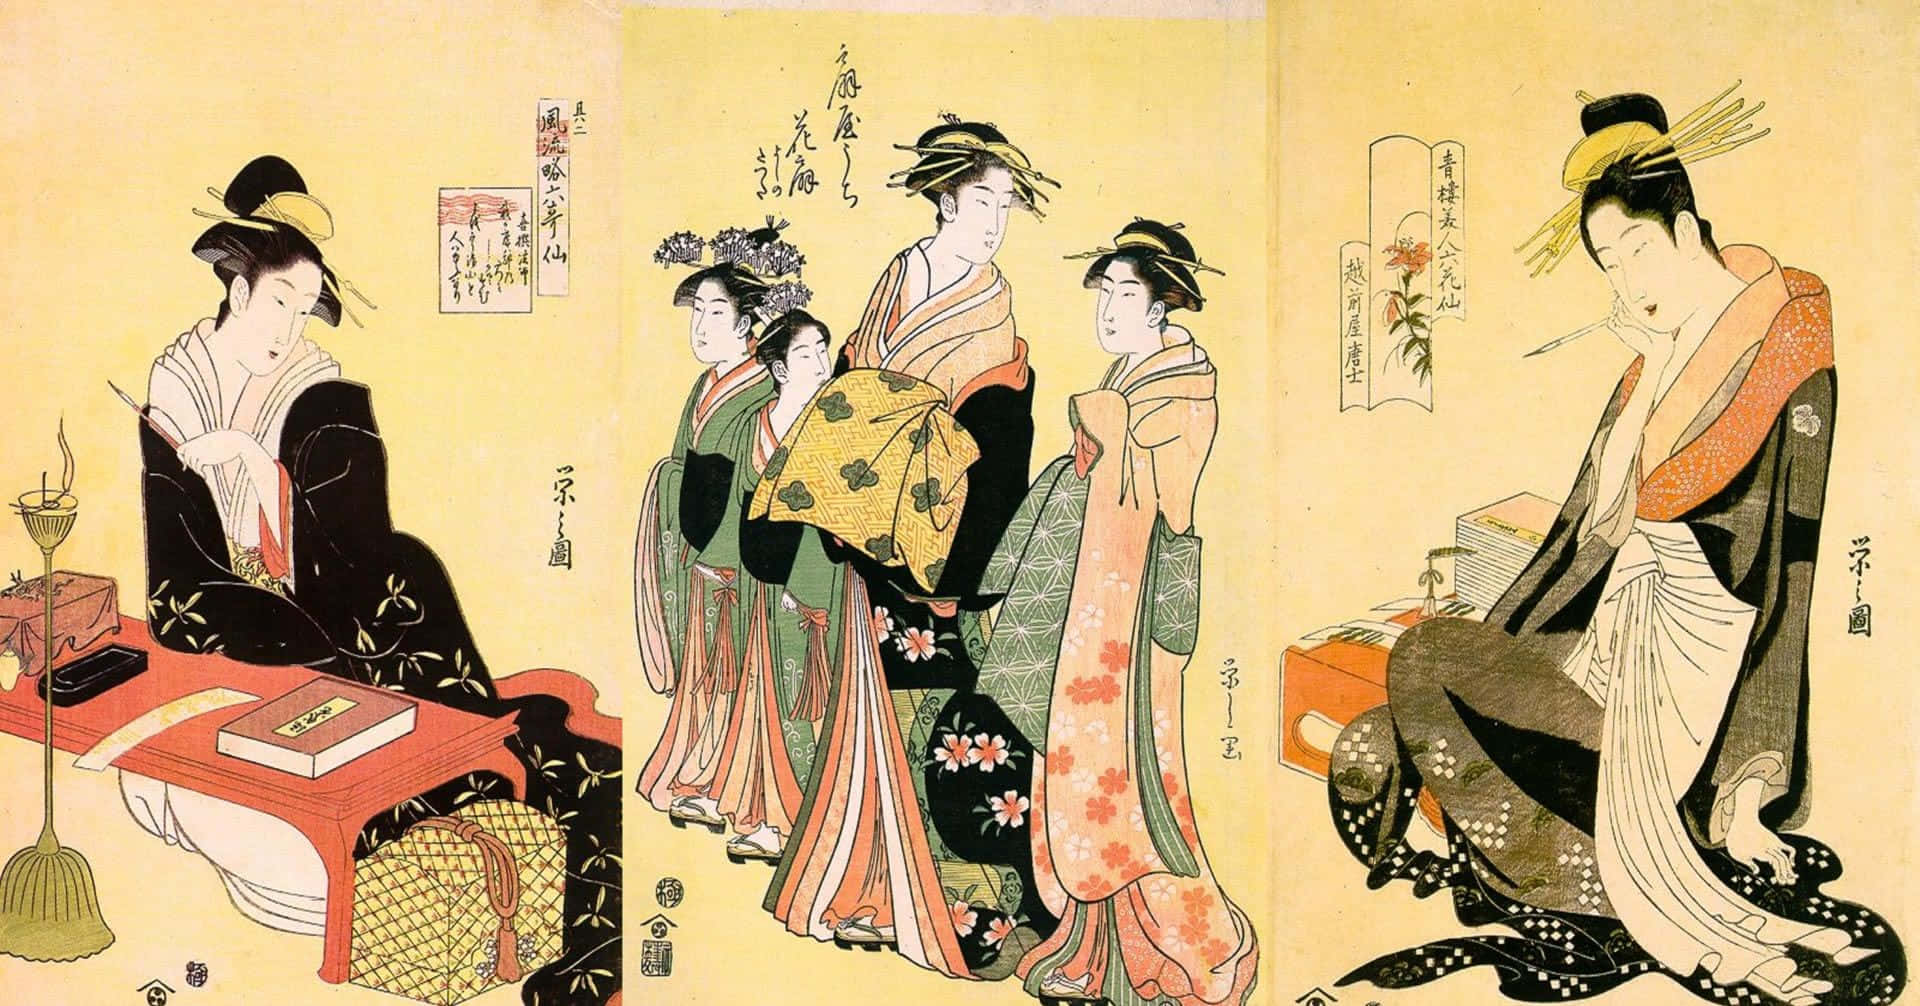 A Painting Of A Group Of Women In Kimono